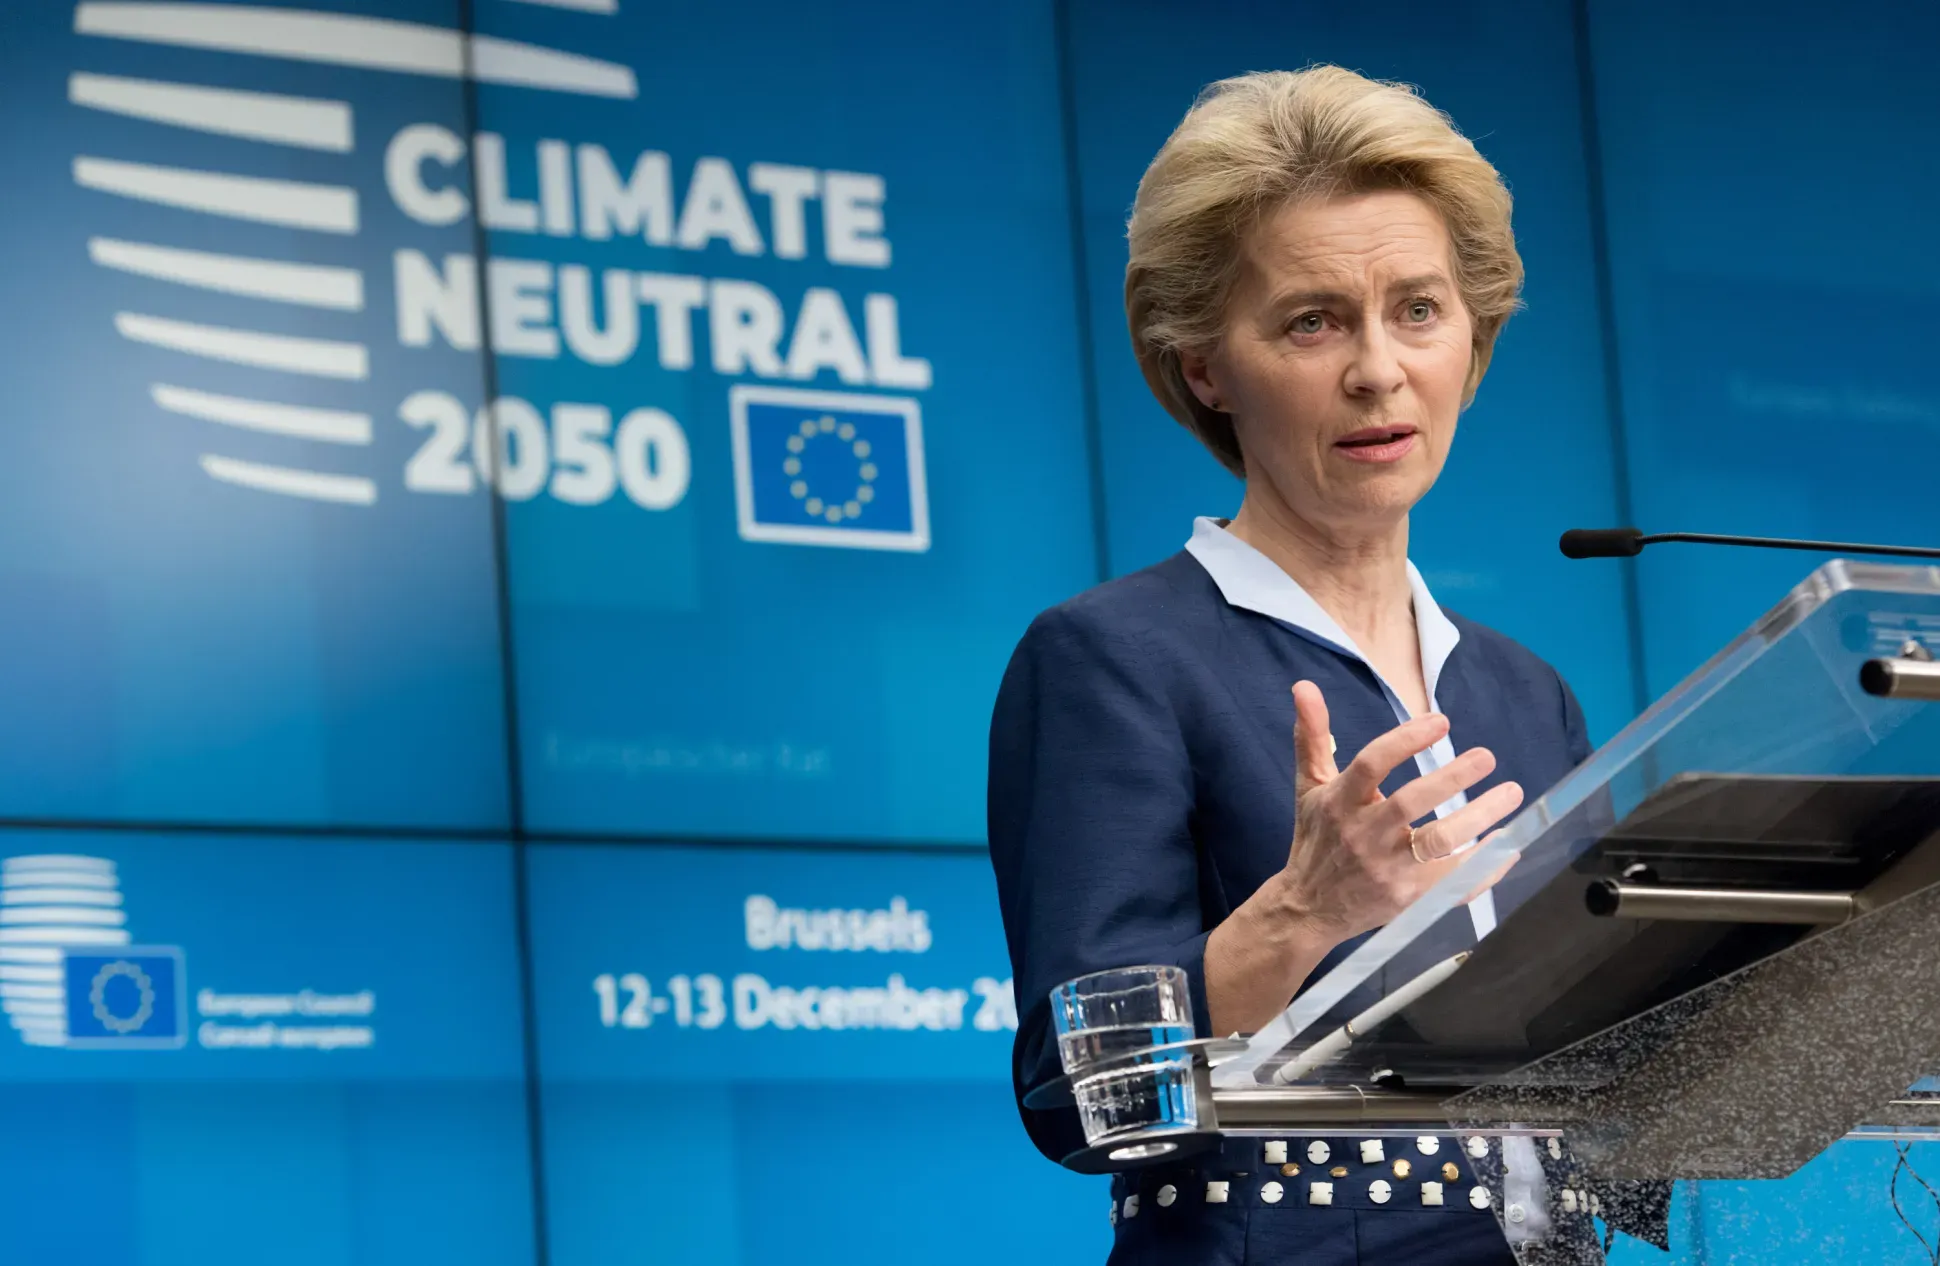 EU's climate target within reach thanks to the European Green Deal